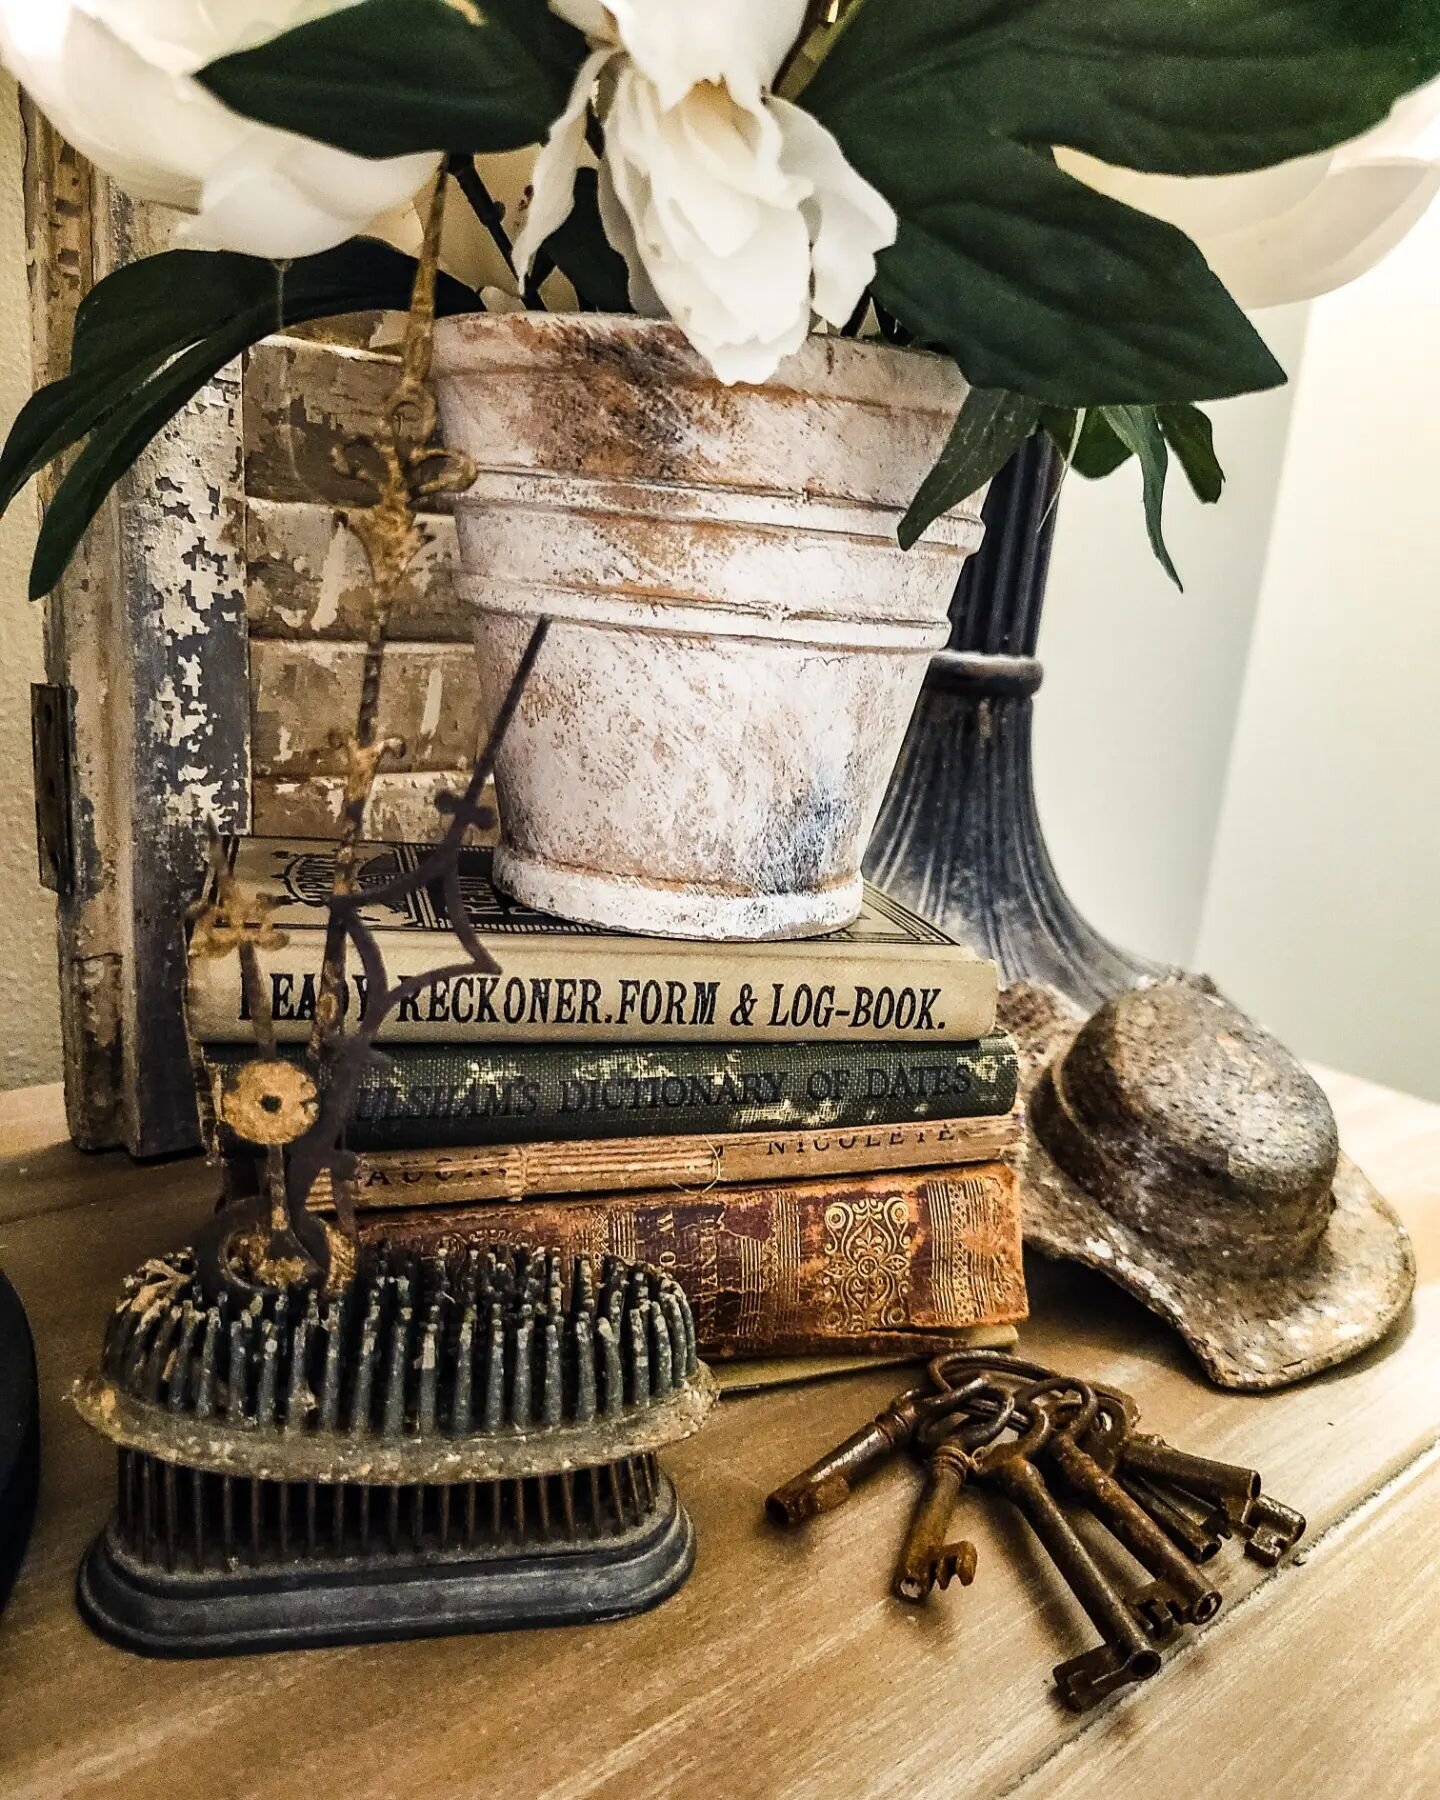 Just a little view of the hallway table.  The old keys and the metal hat from a statue I found @hartlandsalvage. 

#vintagedecor #vintagestuff #vintage #oldkeys #keys #oldbooks #books #flowerfrog #clockhands #rustic #industrial #farmhouse #cottage #c